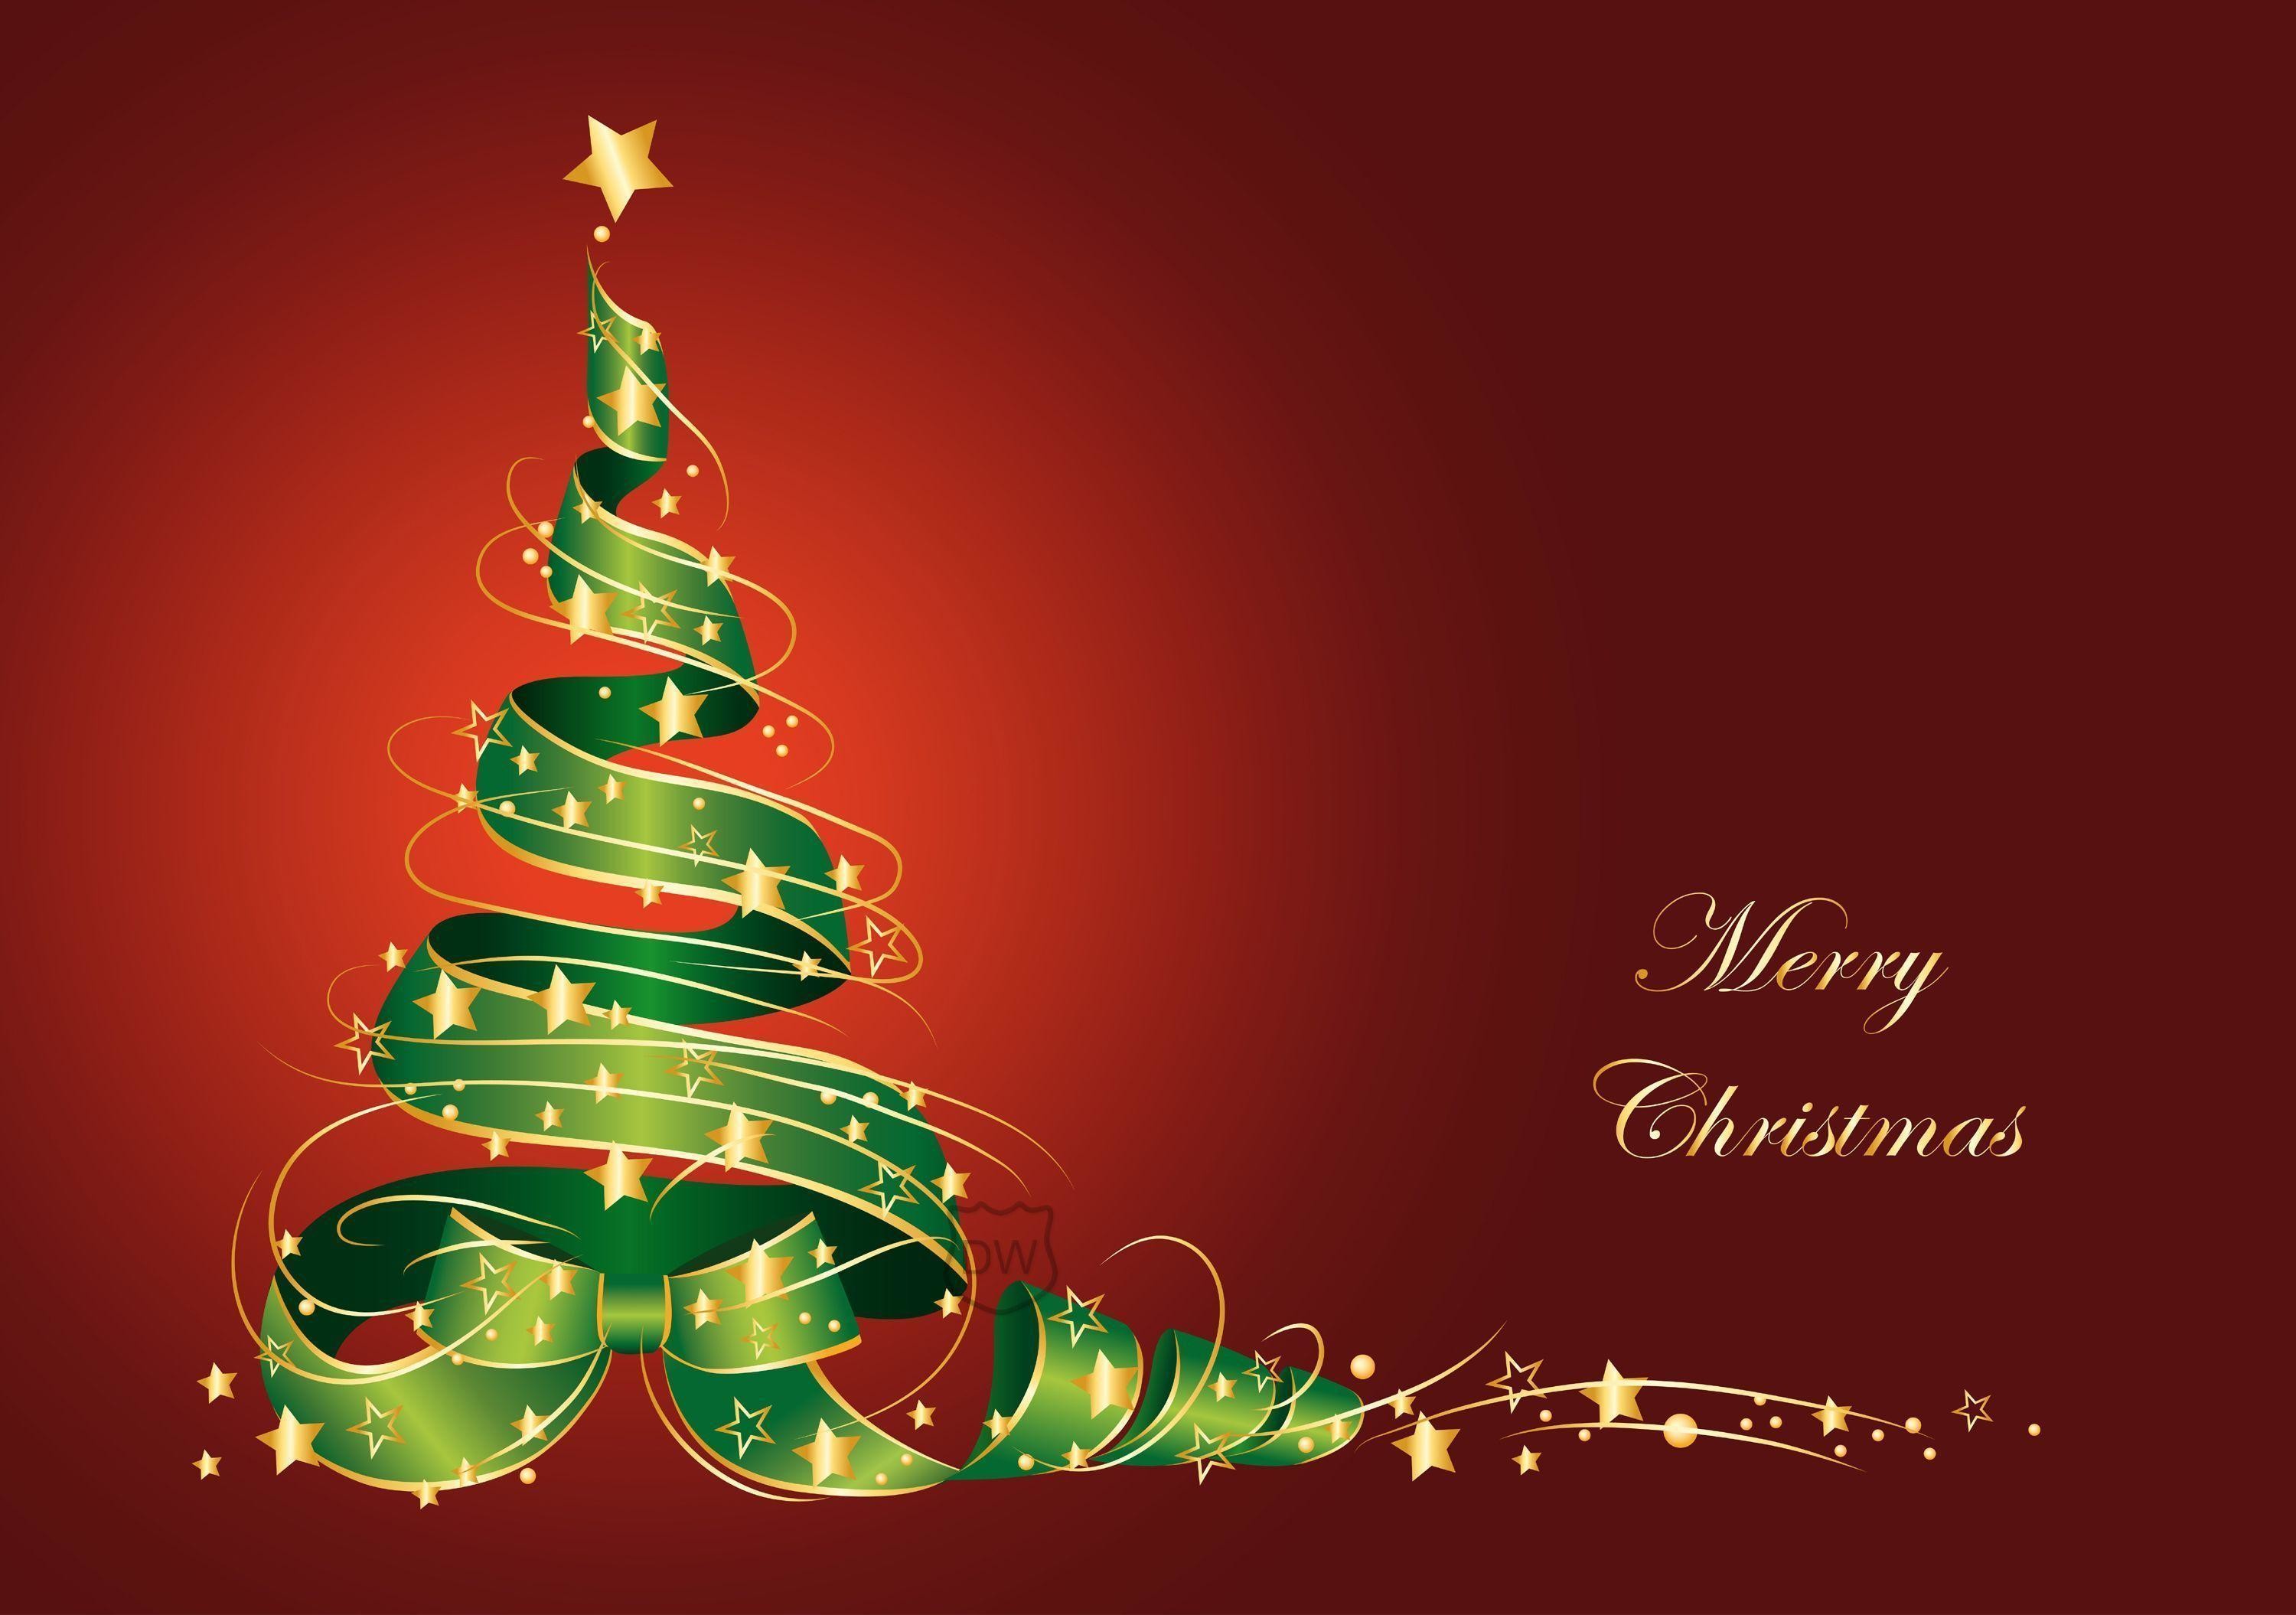 3000x2110 Merry Christmas Wallpaper HD Download | Wallpapers, Backgrounds .